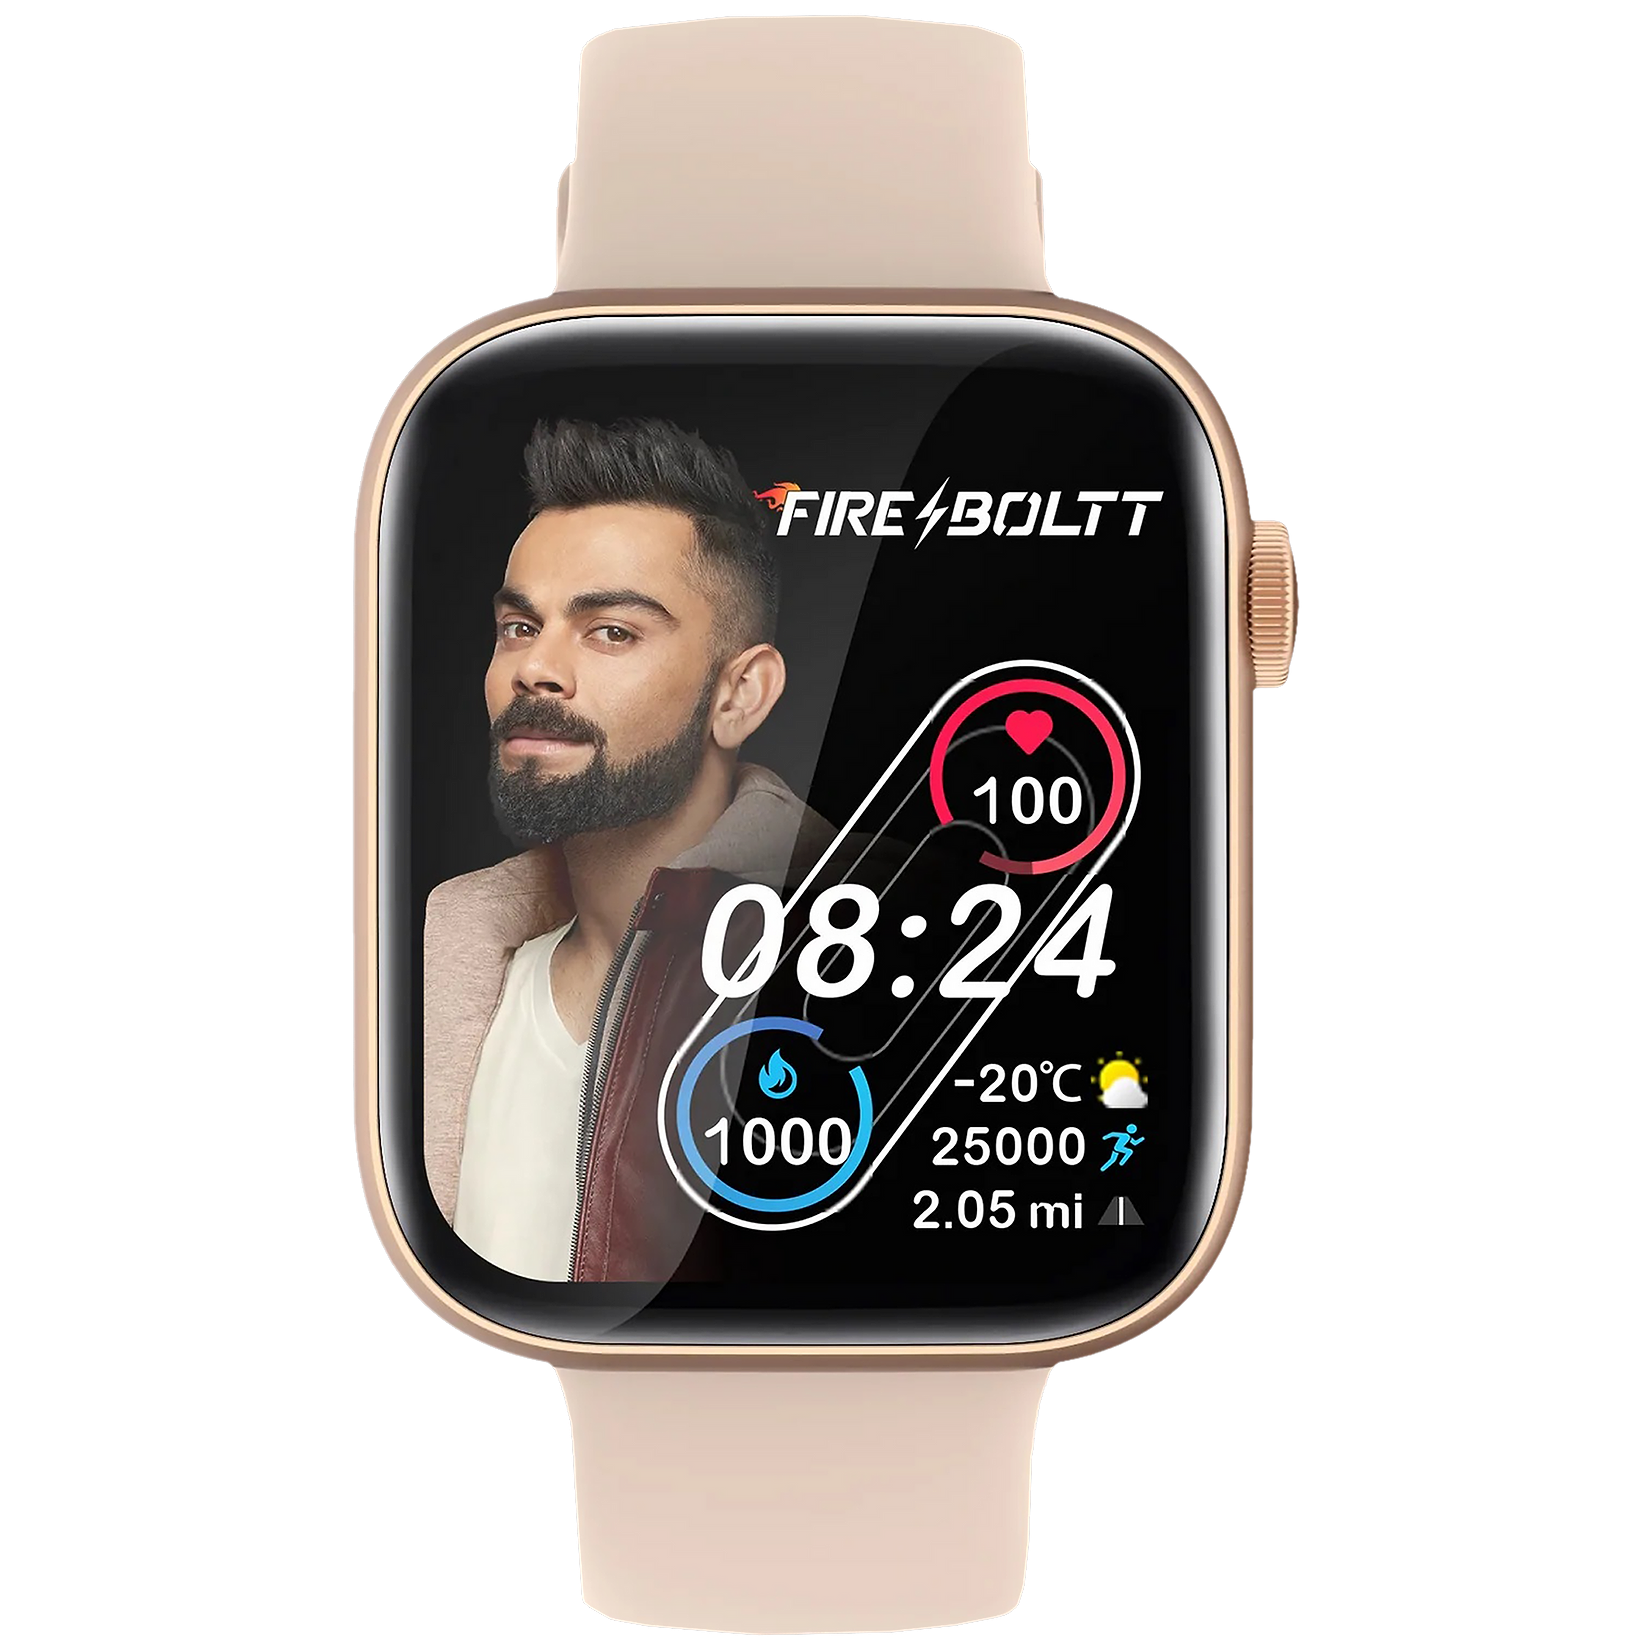 Fire-Boltt Ring 3 Smartwatch with Bluetooth Calling BSW043-GOLD - Kamal Watch Company